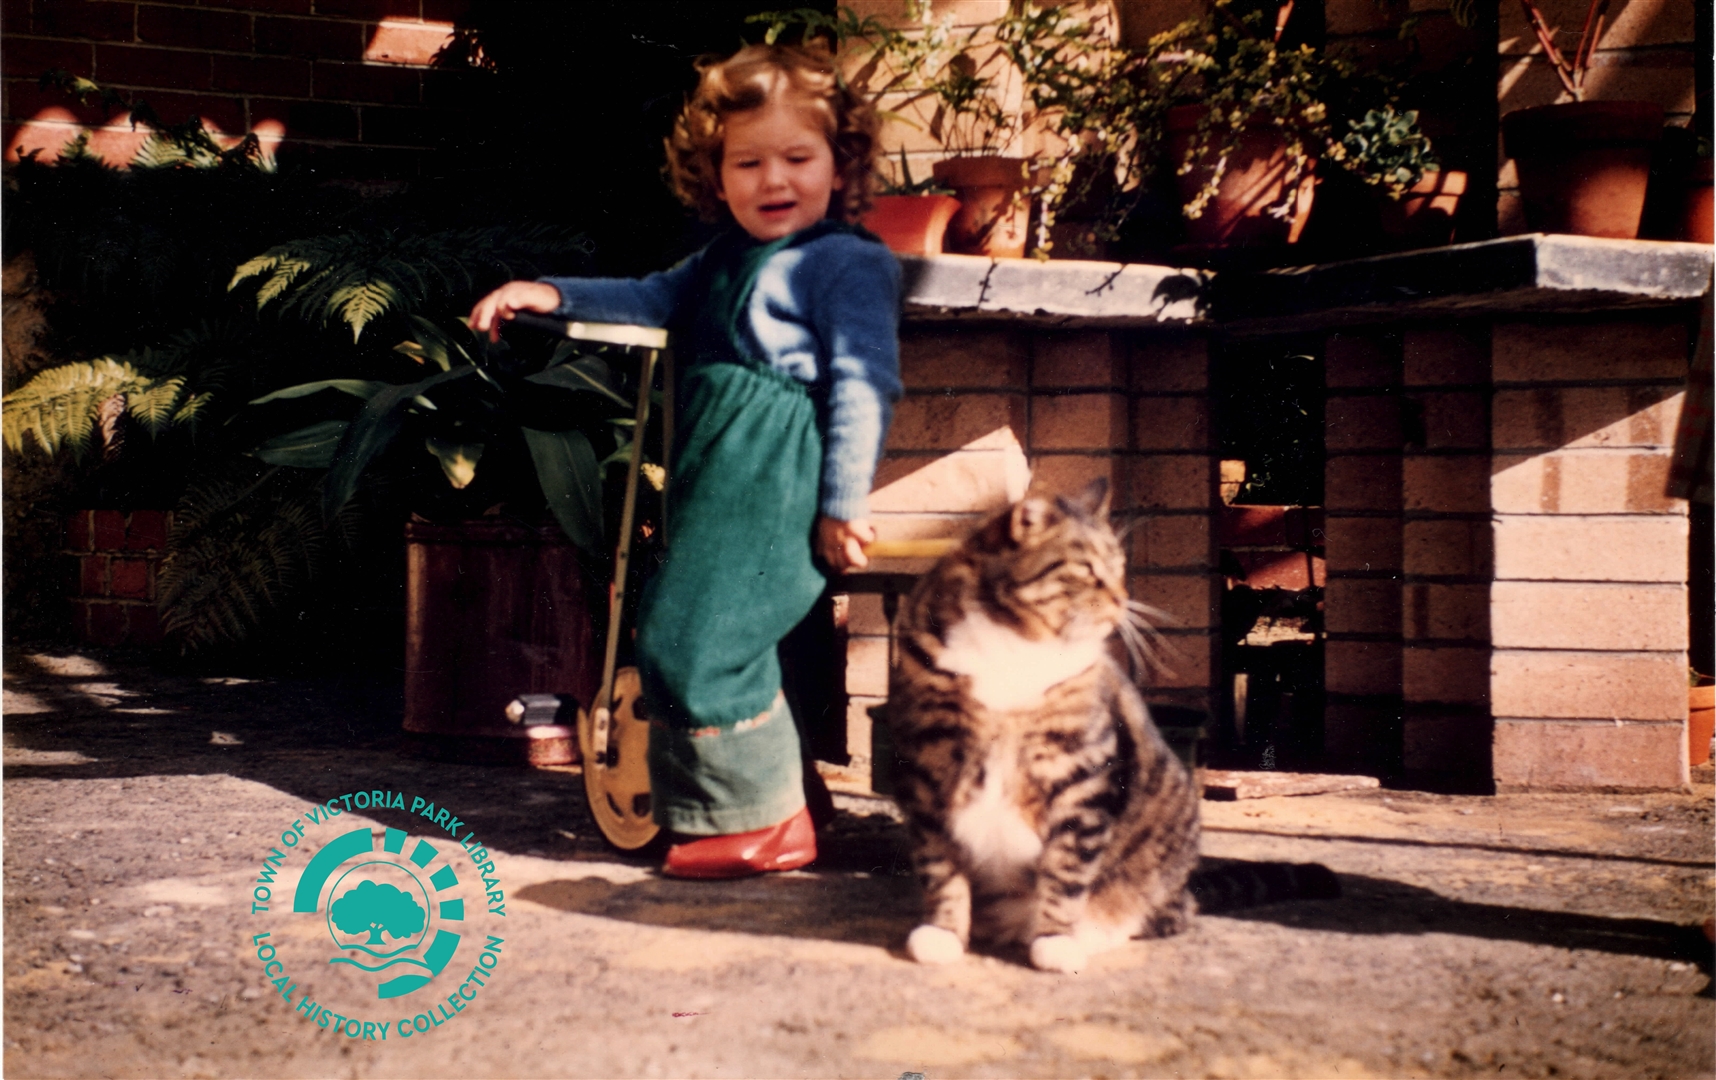 PH00043-14 Kaye Stewart near fernery 107 Westminster St with Peter the cat, c. 1959 Image